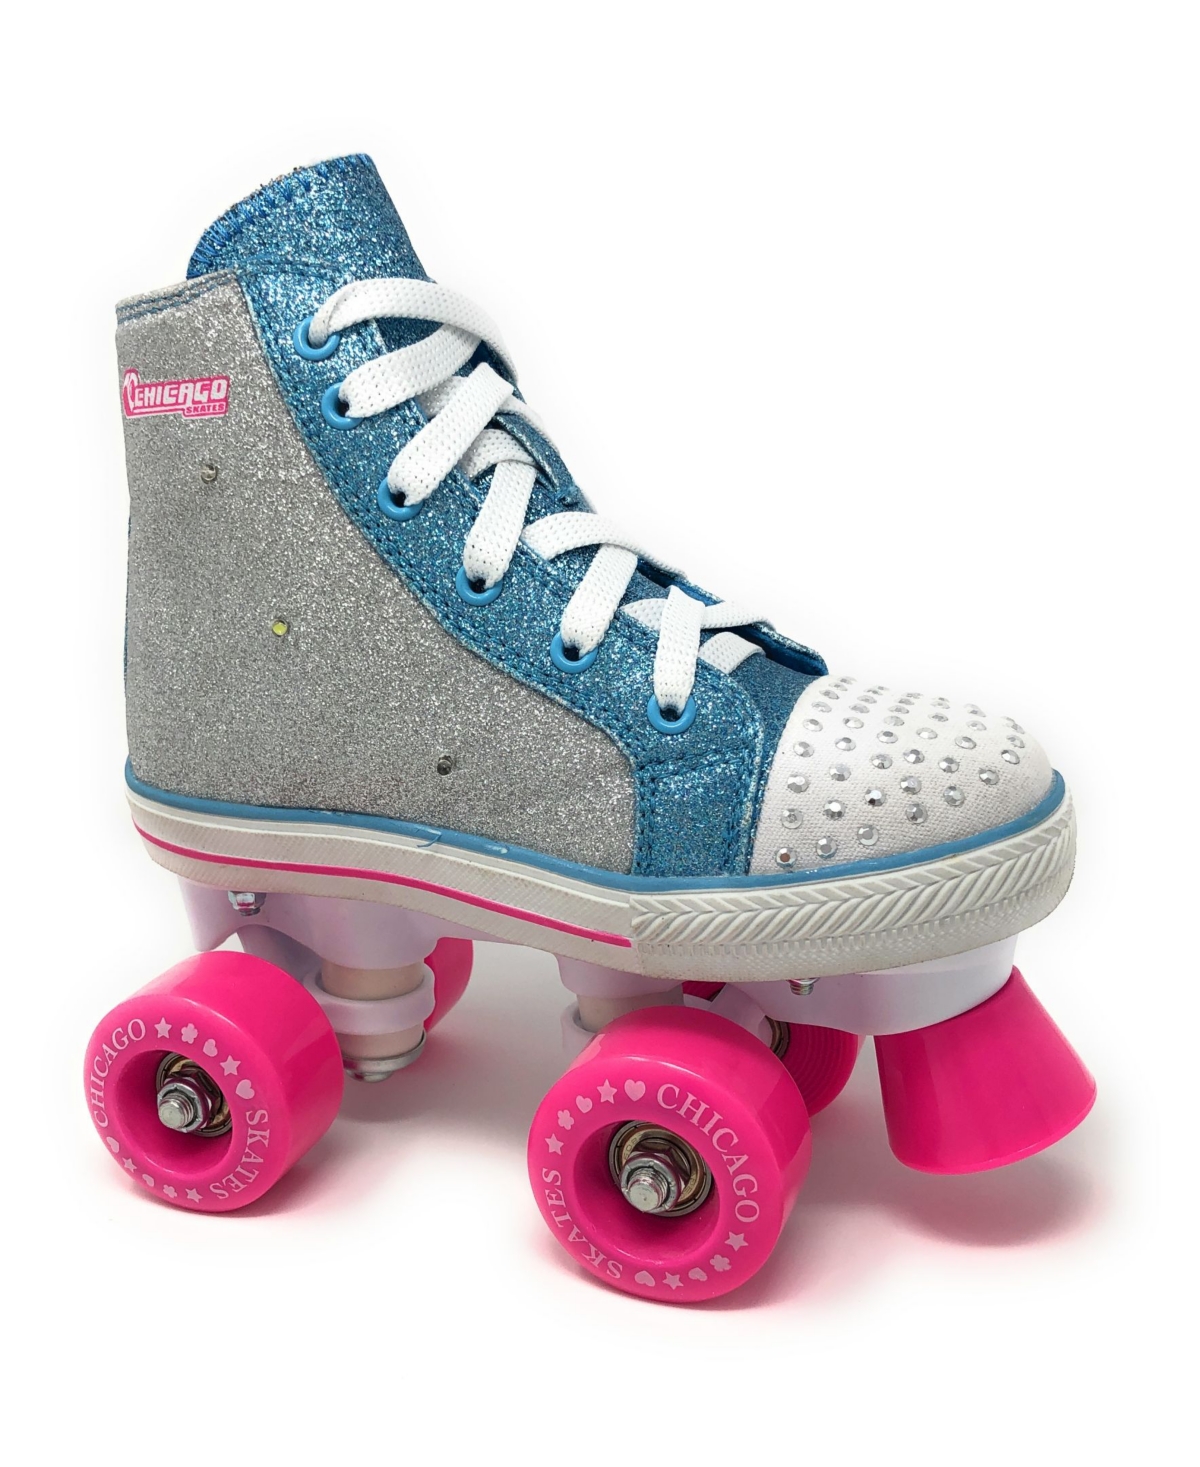 Fashion All-Star Quad Roller Skate - Size 1 - Miscellaneous